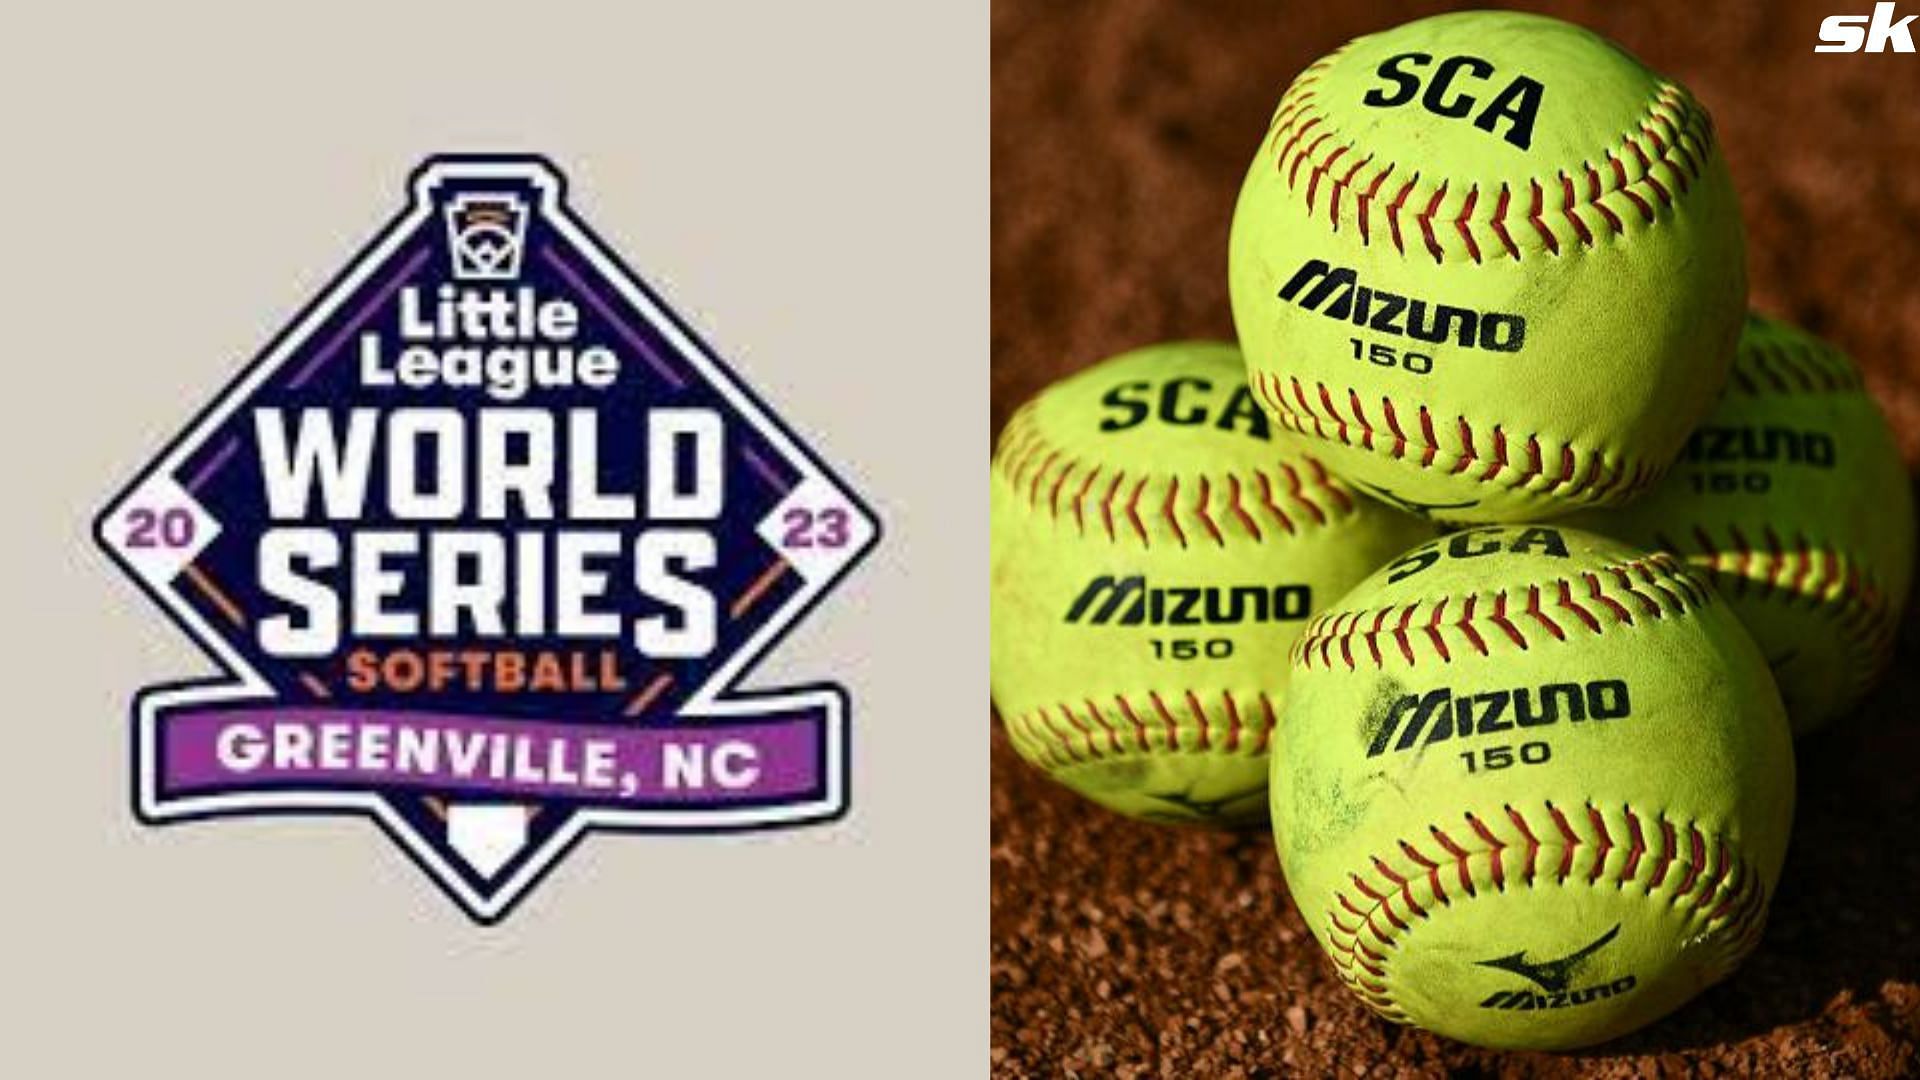 The Little League Softball Word Series 2023 is being played in Greenville, North Carolina